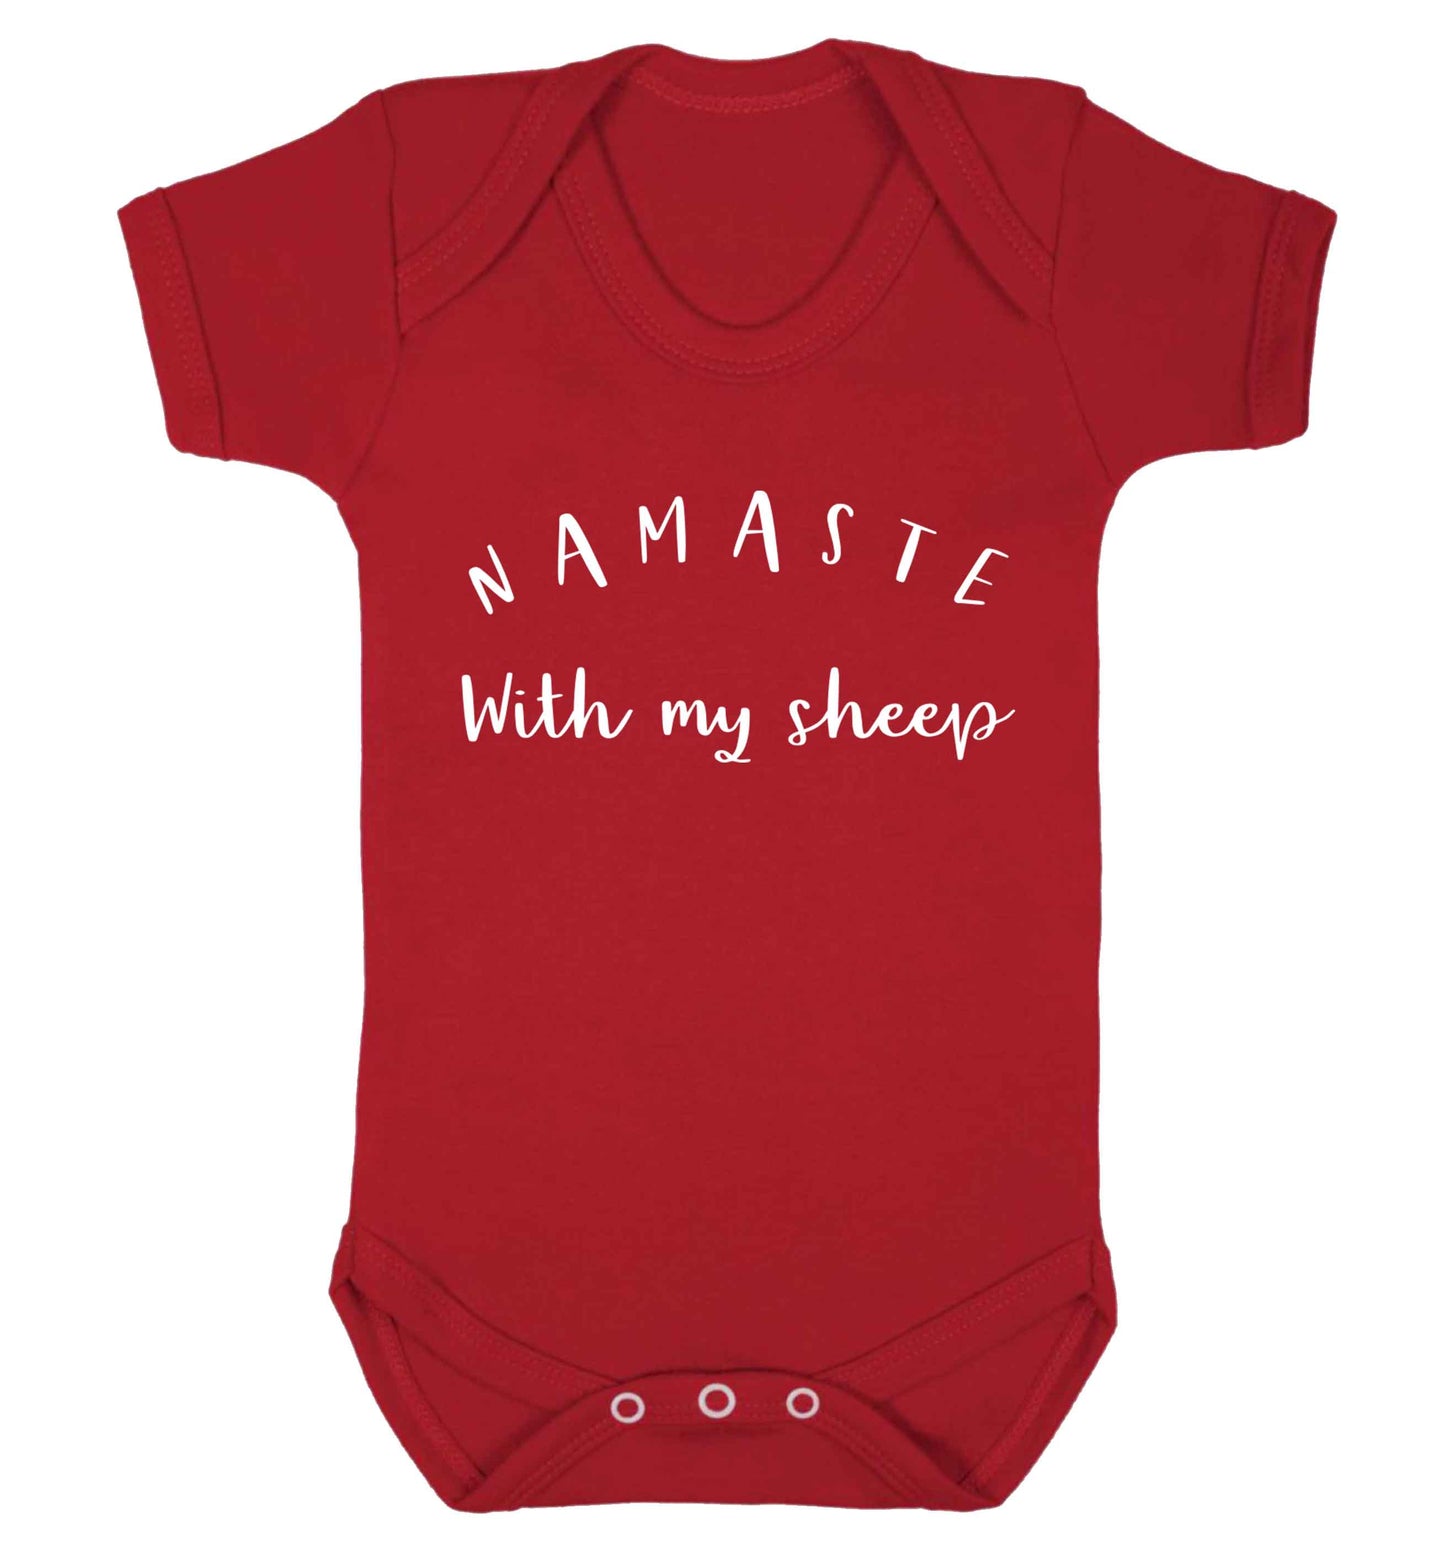 Namaste with my sheep Baby Vest red 18-24 months